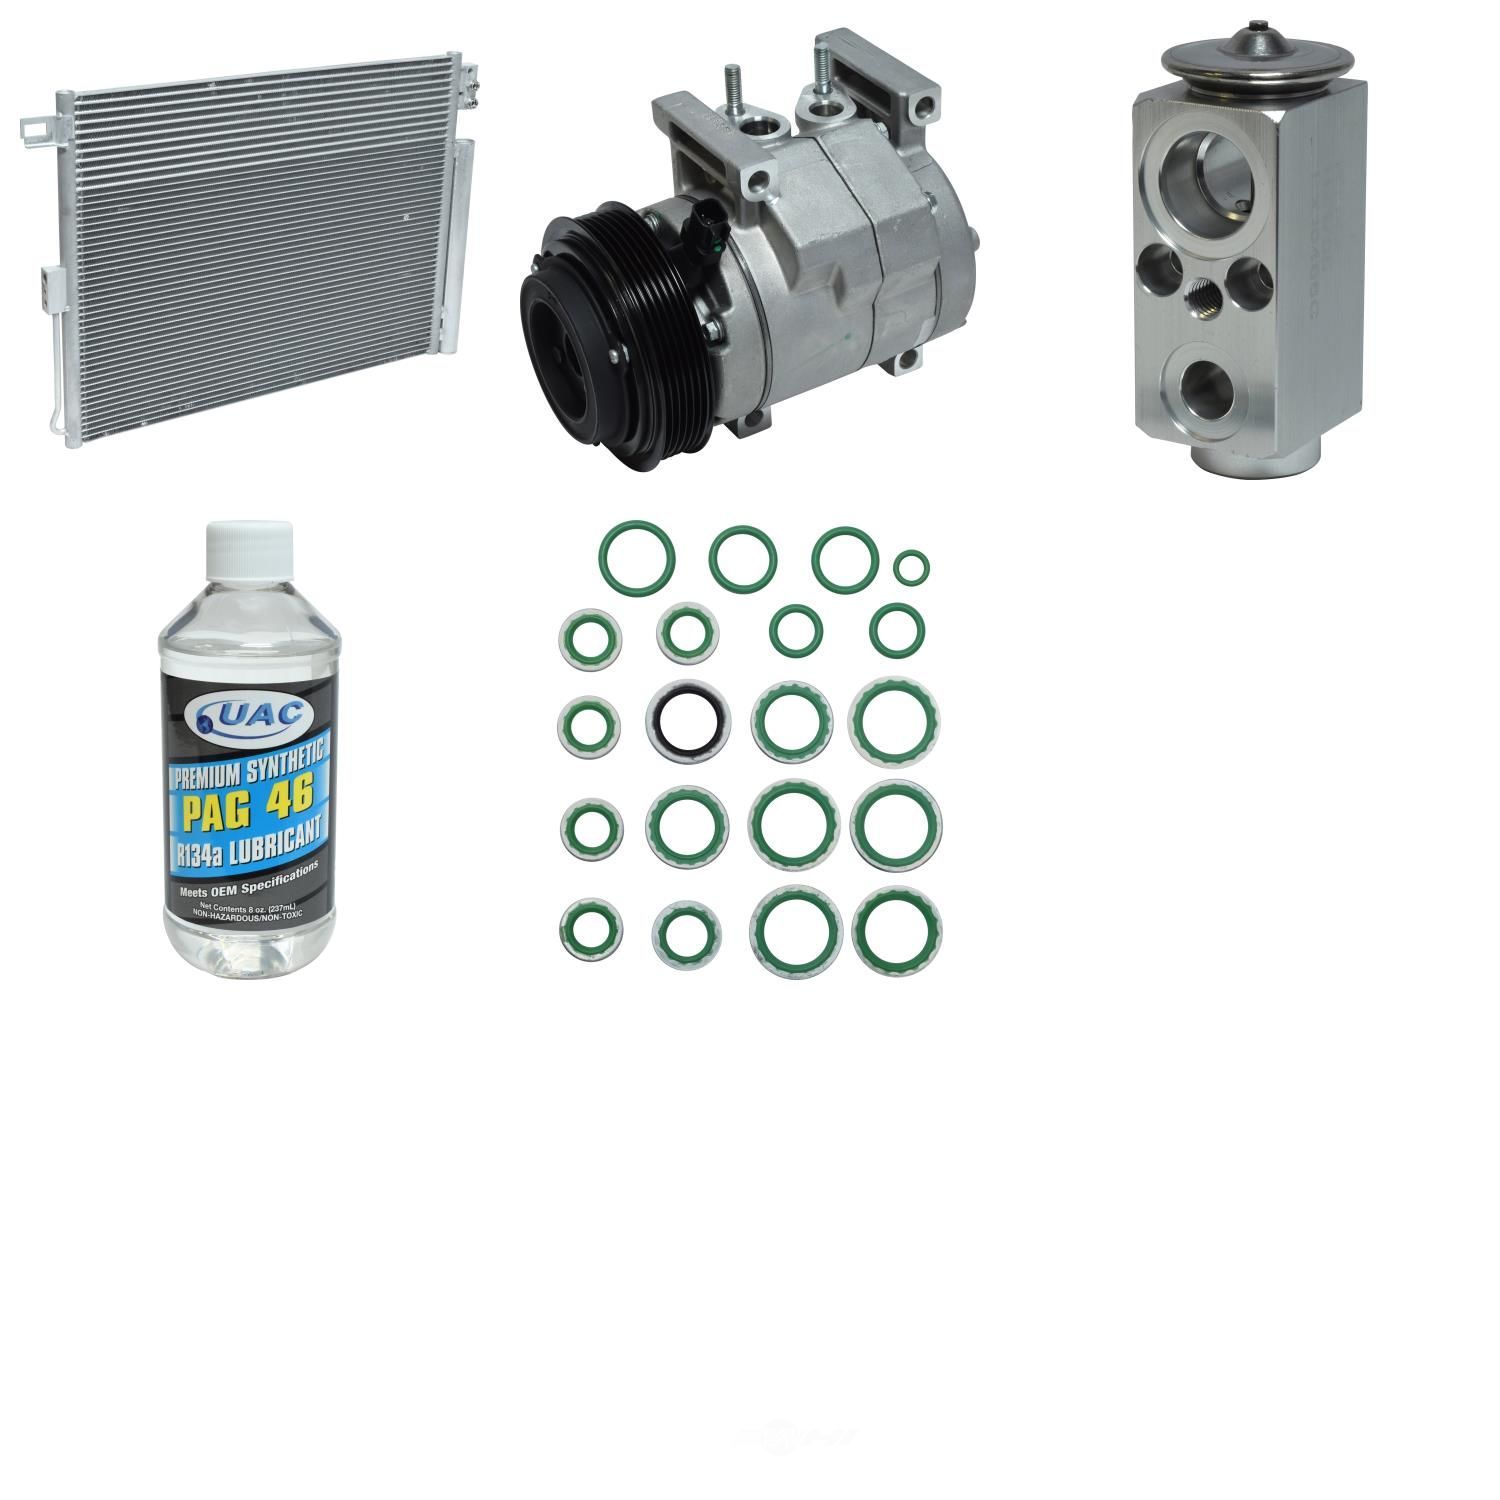 UNIVERSAL AIR CONDITIONER, INC. - Compressor-condenser Replacement Kit - UAC KT 5428A